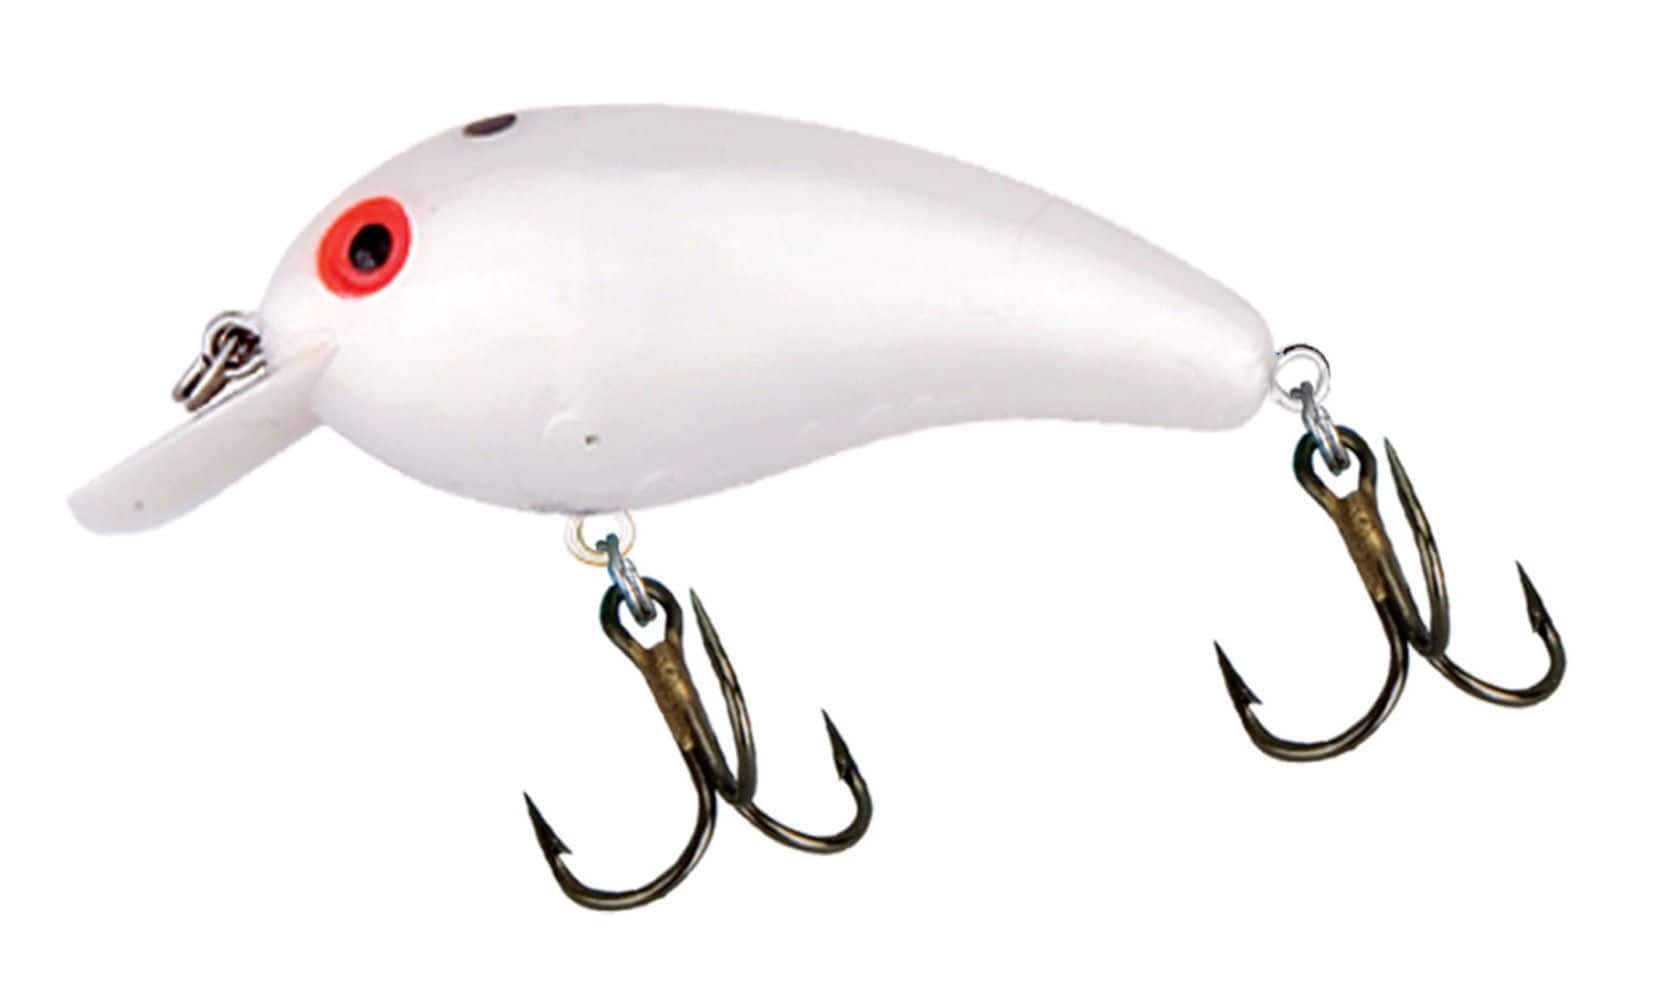 https://media-www.canadiantire.ca/product/playing/fishing/fishing-lures/0788115/cotton-cordell-big-o-pearl-red-eye-3-8oz-59195e6b-7e0c-4353-addd-7b6c4a68fc0a-jpgrendition.jpg